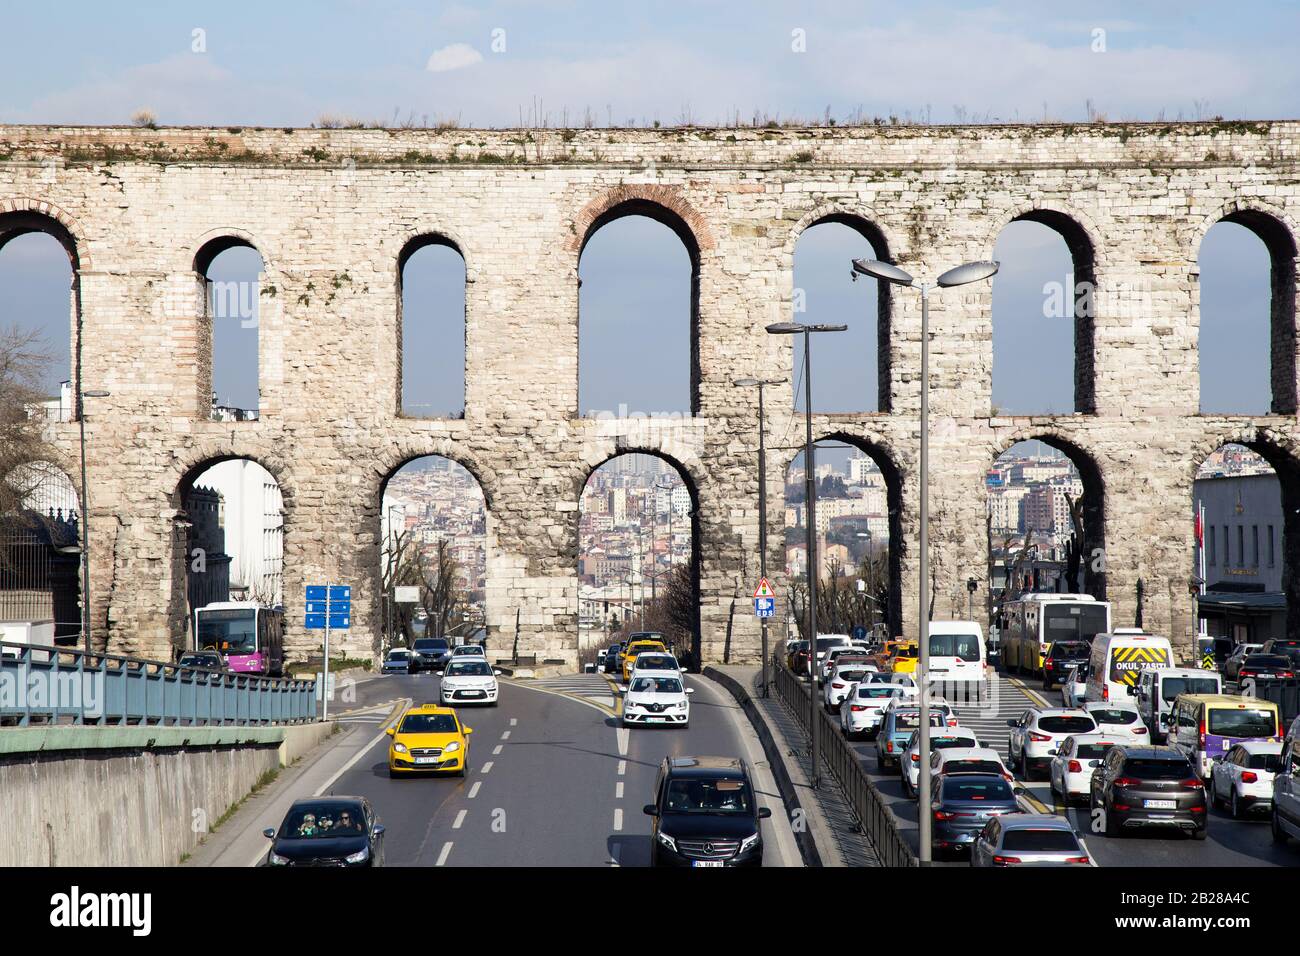 Istanbul, Turkey - 01/19/2019: Valens Aqueduct, located in the old part of Istanbul (Constantinople) on the boulevard of Ataturk. The aqueduct is one Stock Photo